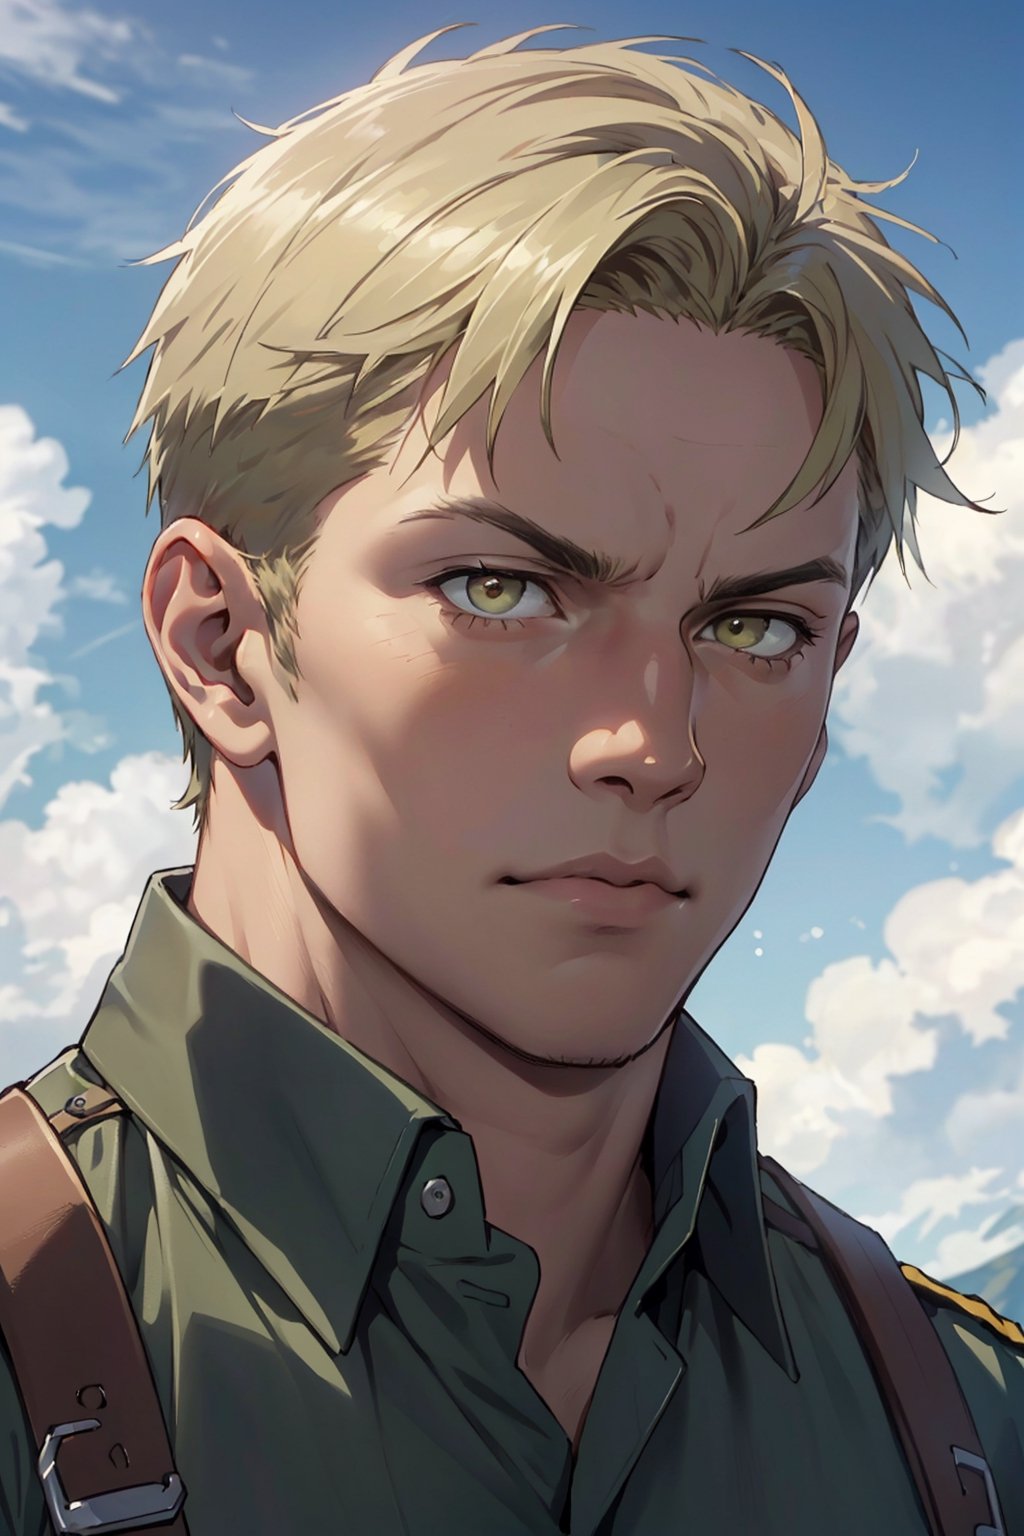 reiner_braun, (blond hair, short hair, bare forehead
), (hazel eyes:1.3), (aquiline nose:1.2), shaved face, fit body, (wearing pure military green collared shirt:1.2), handsome, manly, (rugged nose), virile, arrogant, charming, alluring, intense gaze, angled eyebrow, (standing), (upper body in frame), simple background, green plains, cloudy blue sky, perfect light, only1 image, perfect anatomy, perfect proportions, perfect perspective, 8k, HQ, (best quality:1.5, hyperrealistic:1.5, photorealistic:1.4, madly detailed CG unity 8k wallpaper:1.5, masterpiece:1.3, madly detailed photo:1.2), (hyper-realistic lifelike texture:1.4, realistic eyes:1.2), picture-perfect face, perfect eye pupil, detailed eyes, realistic, HD, UHD, (front view:1.2), portrait, looking outside frame,(MkmCut),reiner braun,perfecteyes,mature